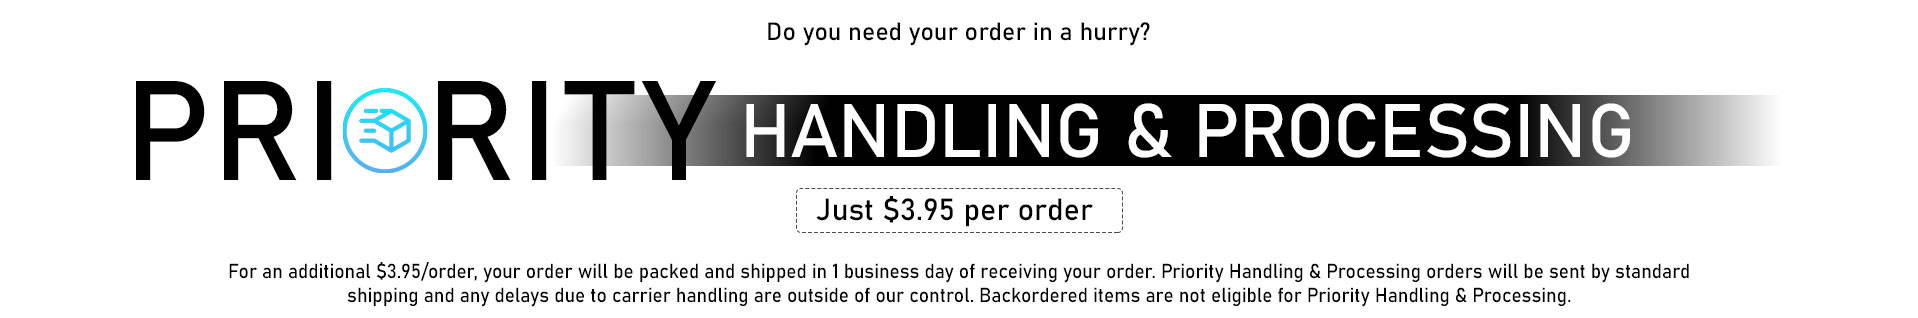 Priority Handling & Processing: Do you need your order in a hurry? Just $3.95 per order. For an additional $3.95 per order, your order will be packed and shipped in 1 business day of receiving your order. Priority Handling & Processing orders will be sent by standard shipping and any delays due to carrier handling are outside of our control. Backordered items are not eligible for Priority Handling & Processing.